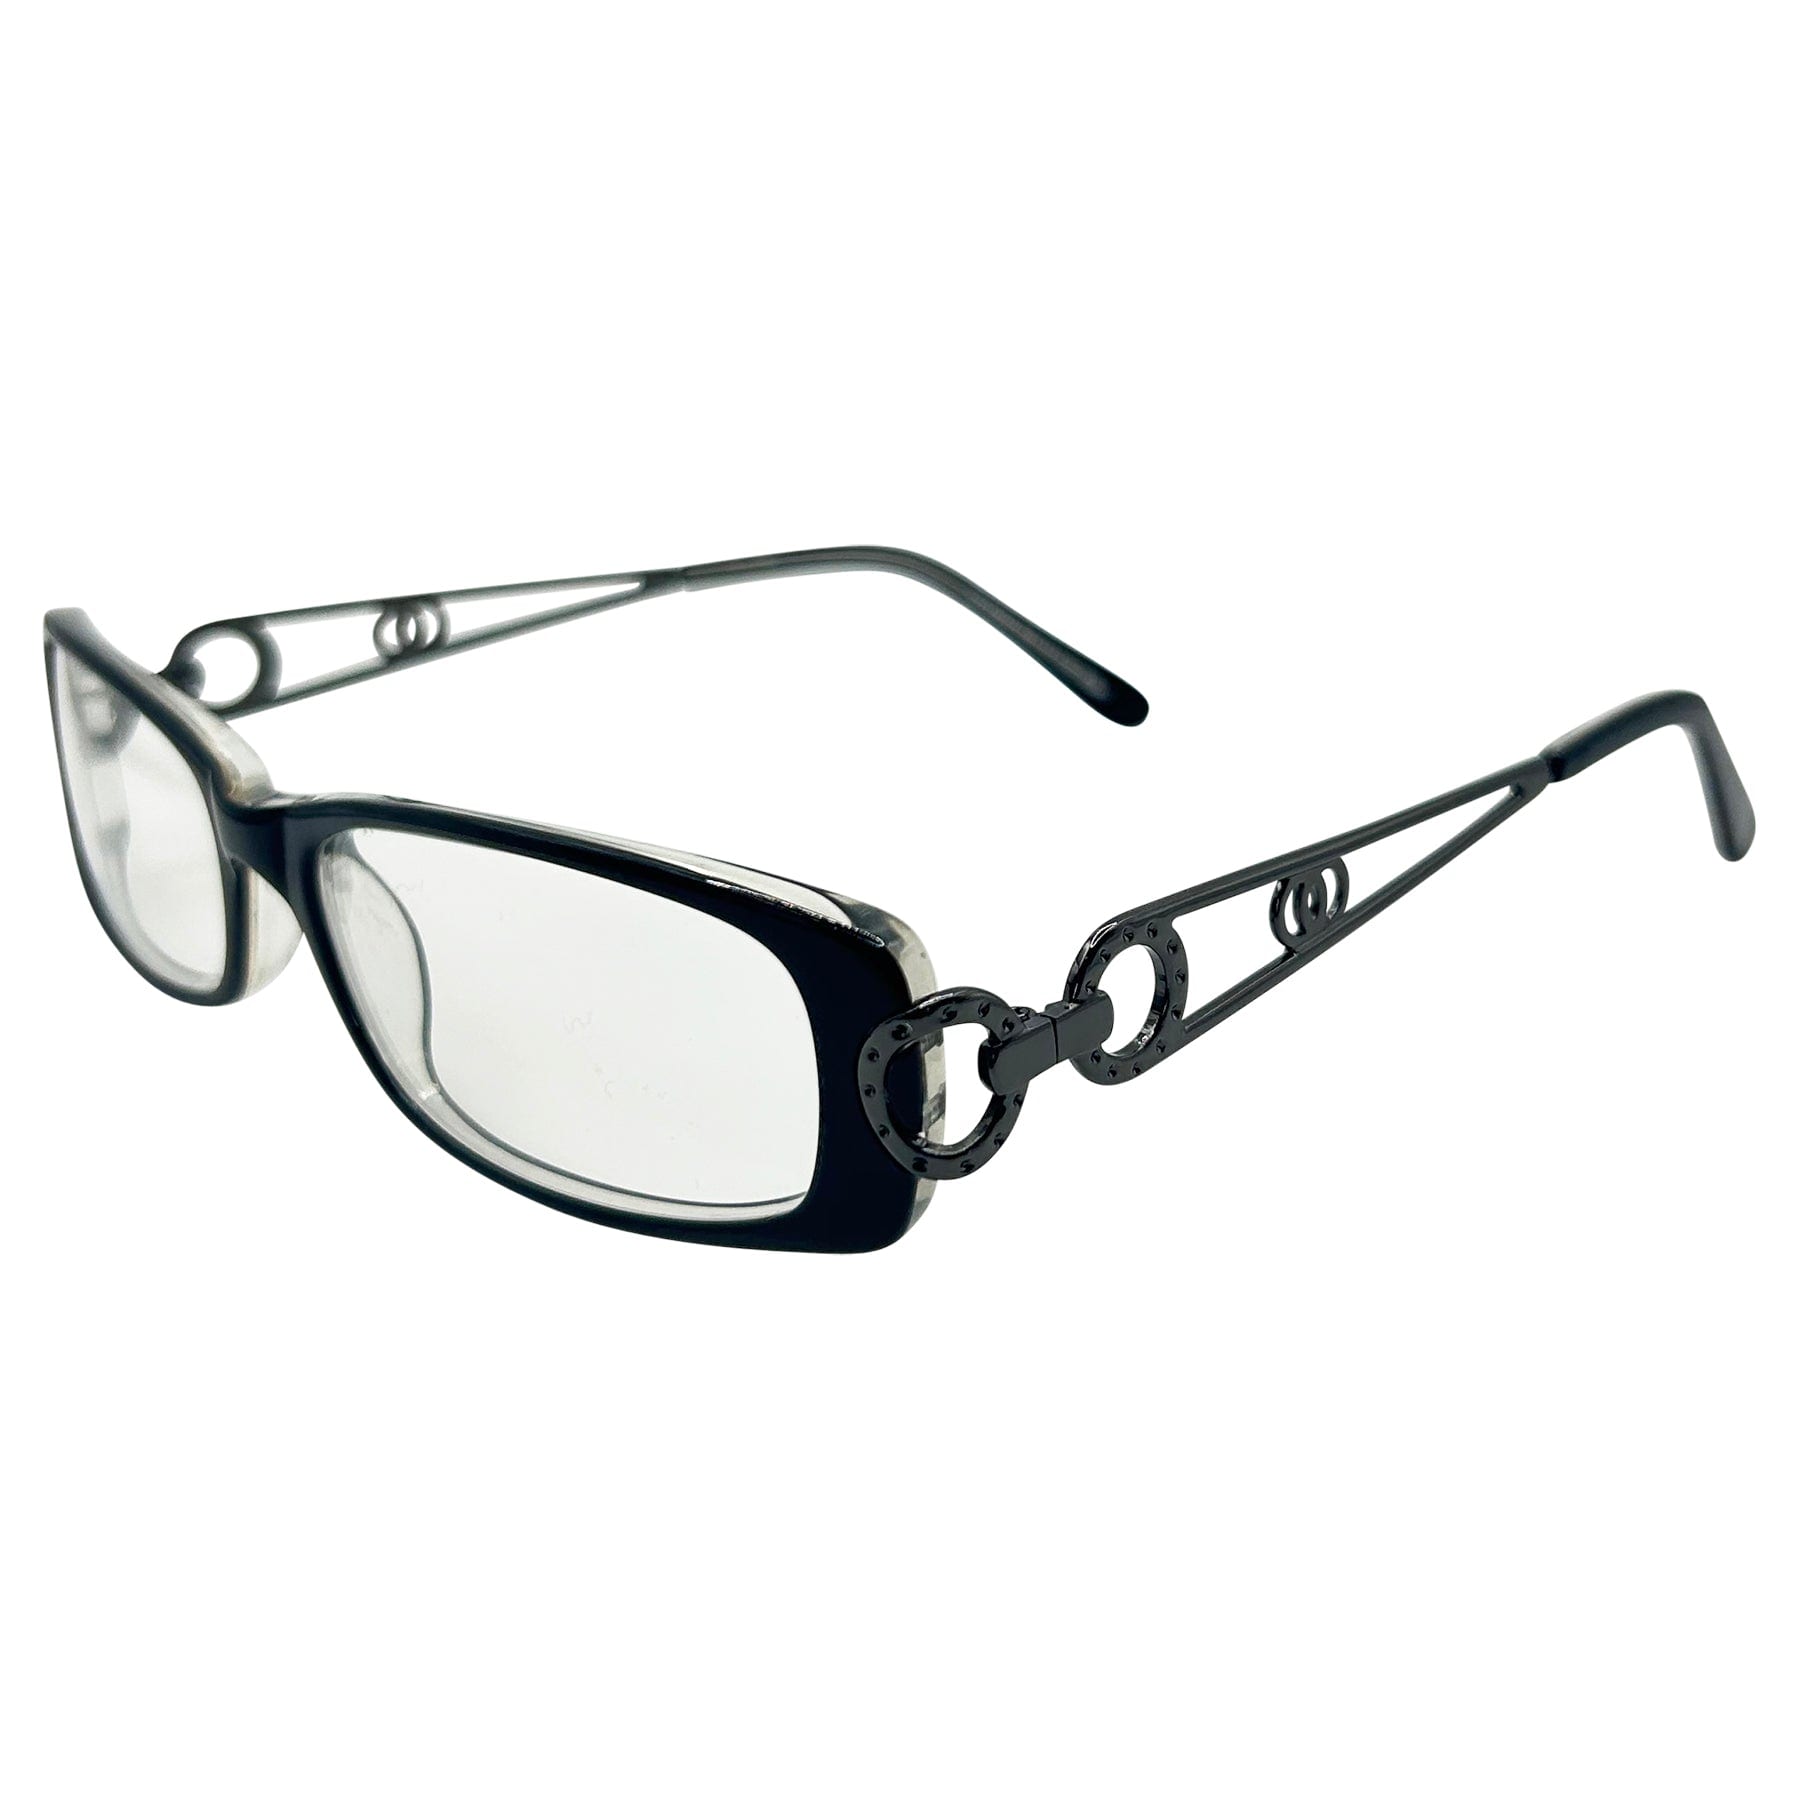 black color glasses with clear lens and 90s style frame